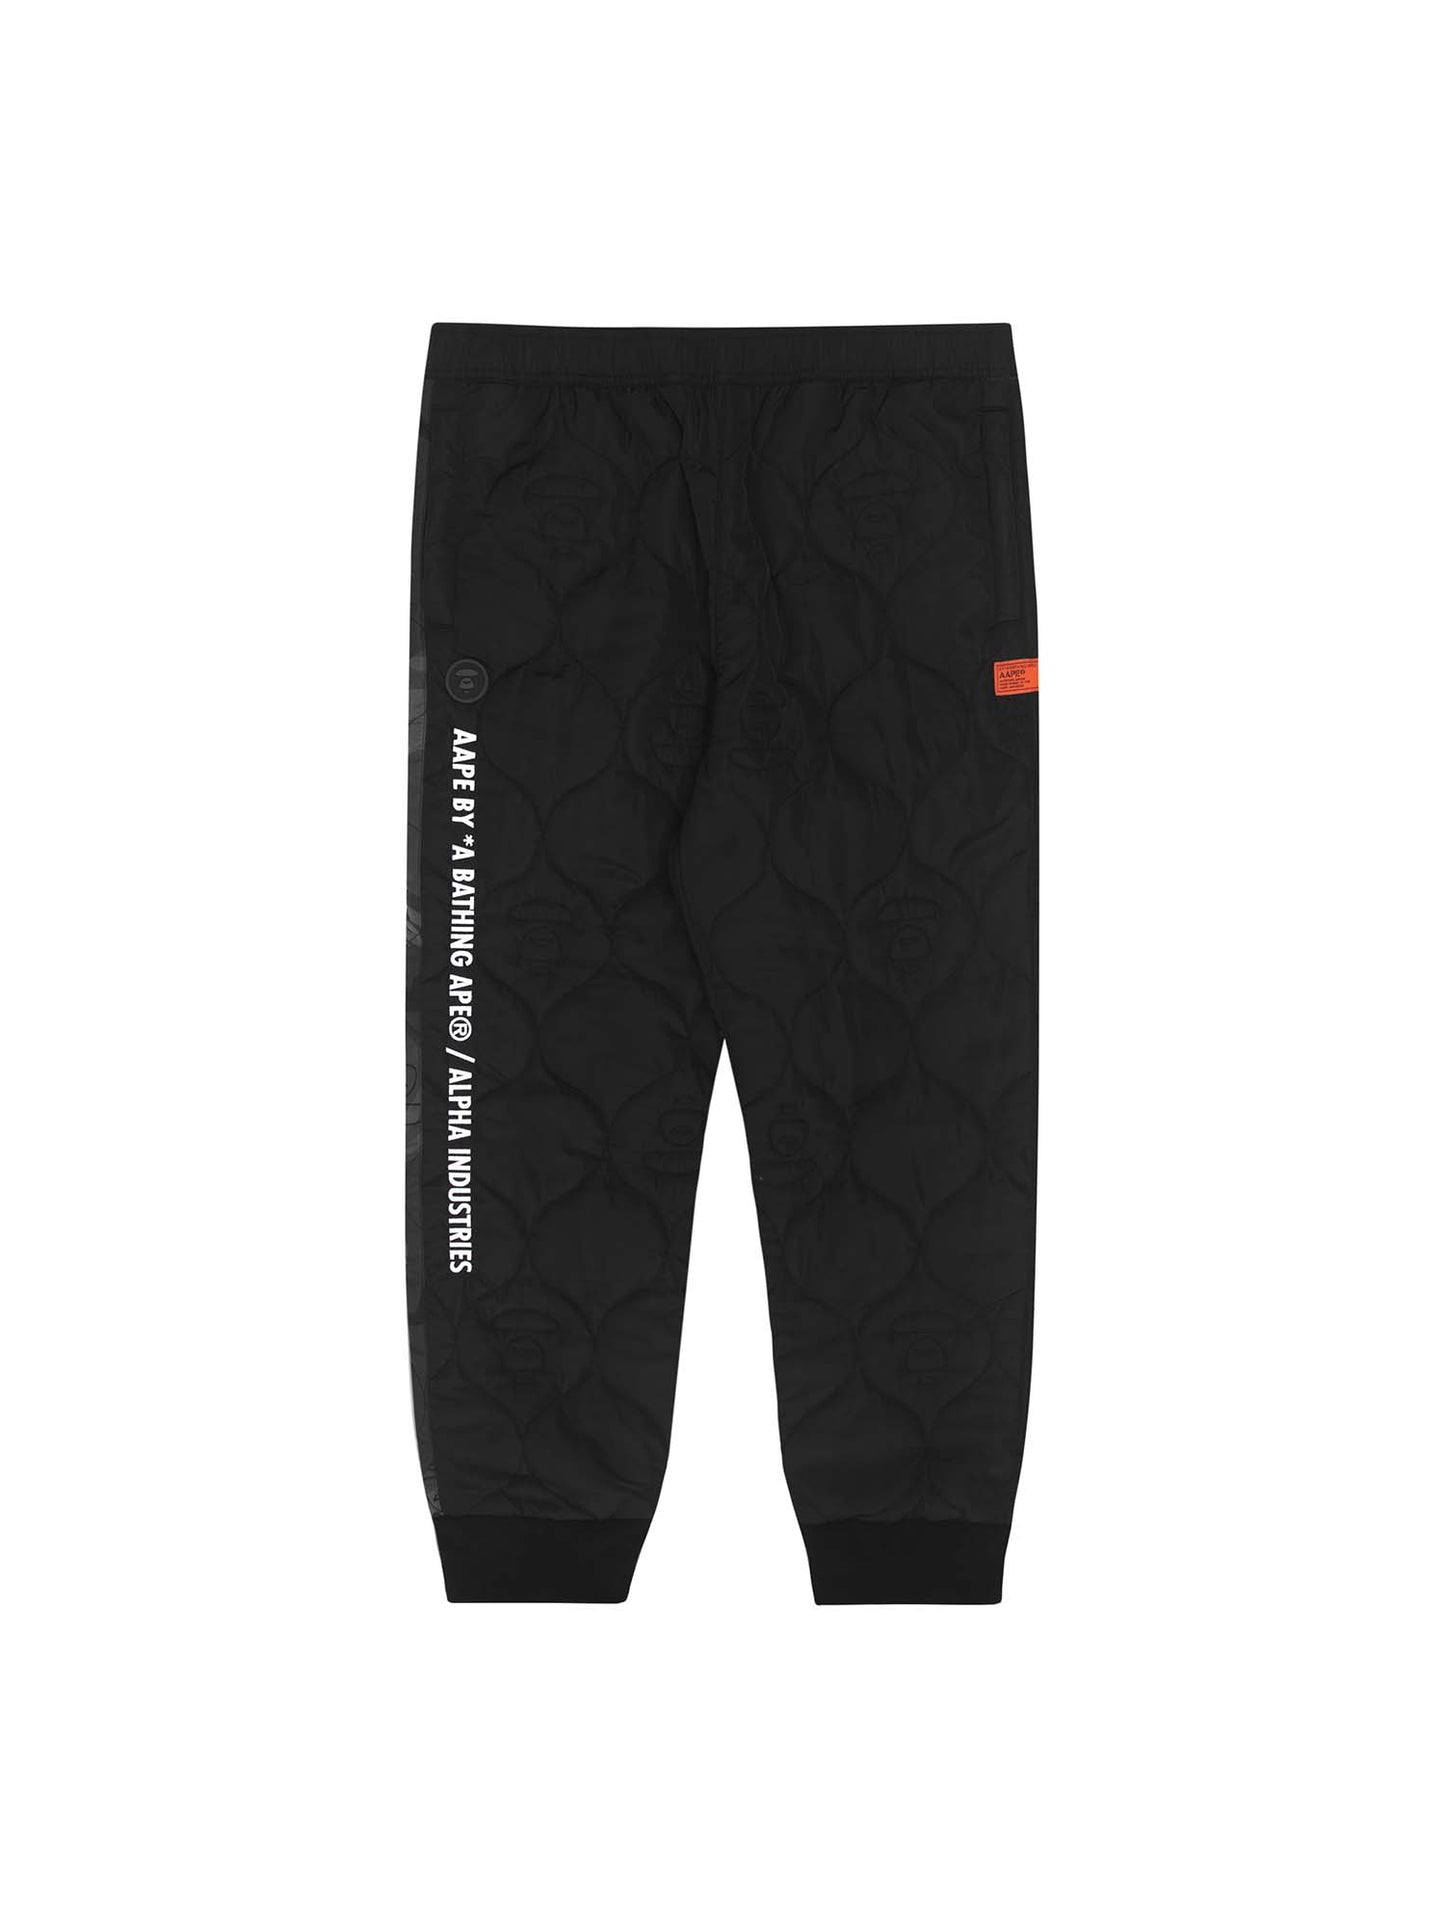 AAPE X ALPHA QUILTED PANT BOTTOM Alpha Industries, Inc. BLACK L 